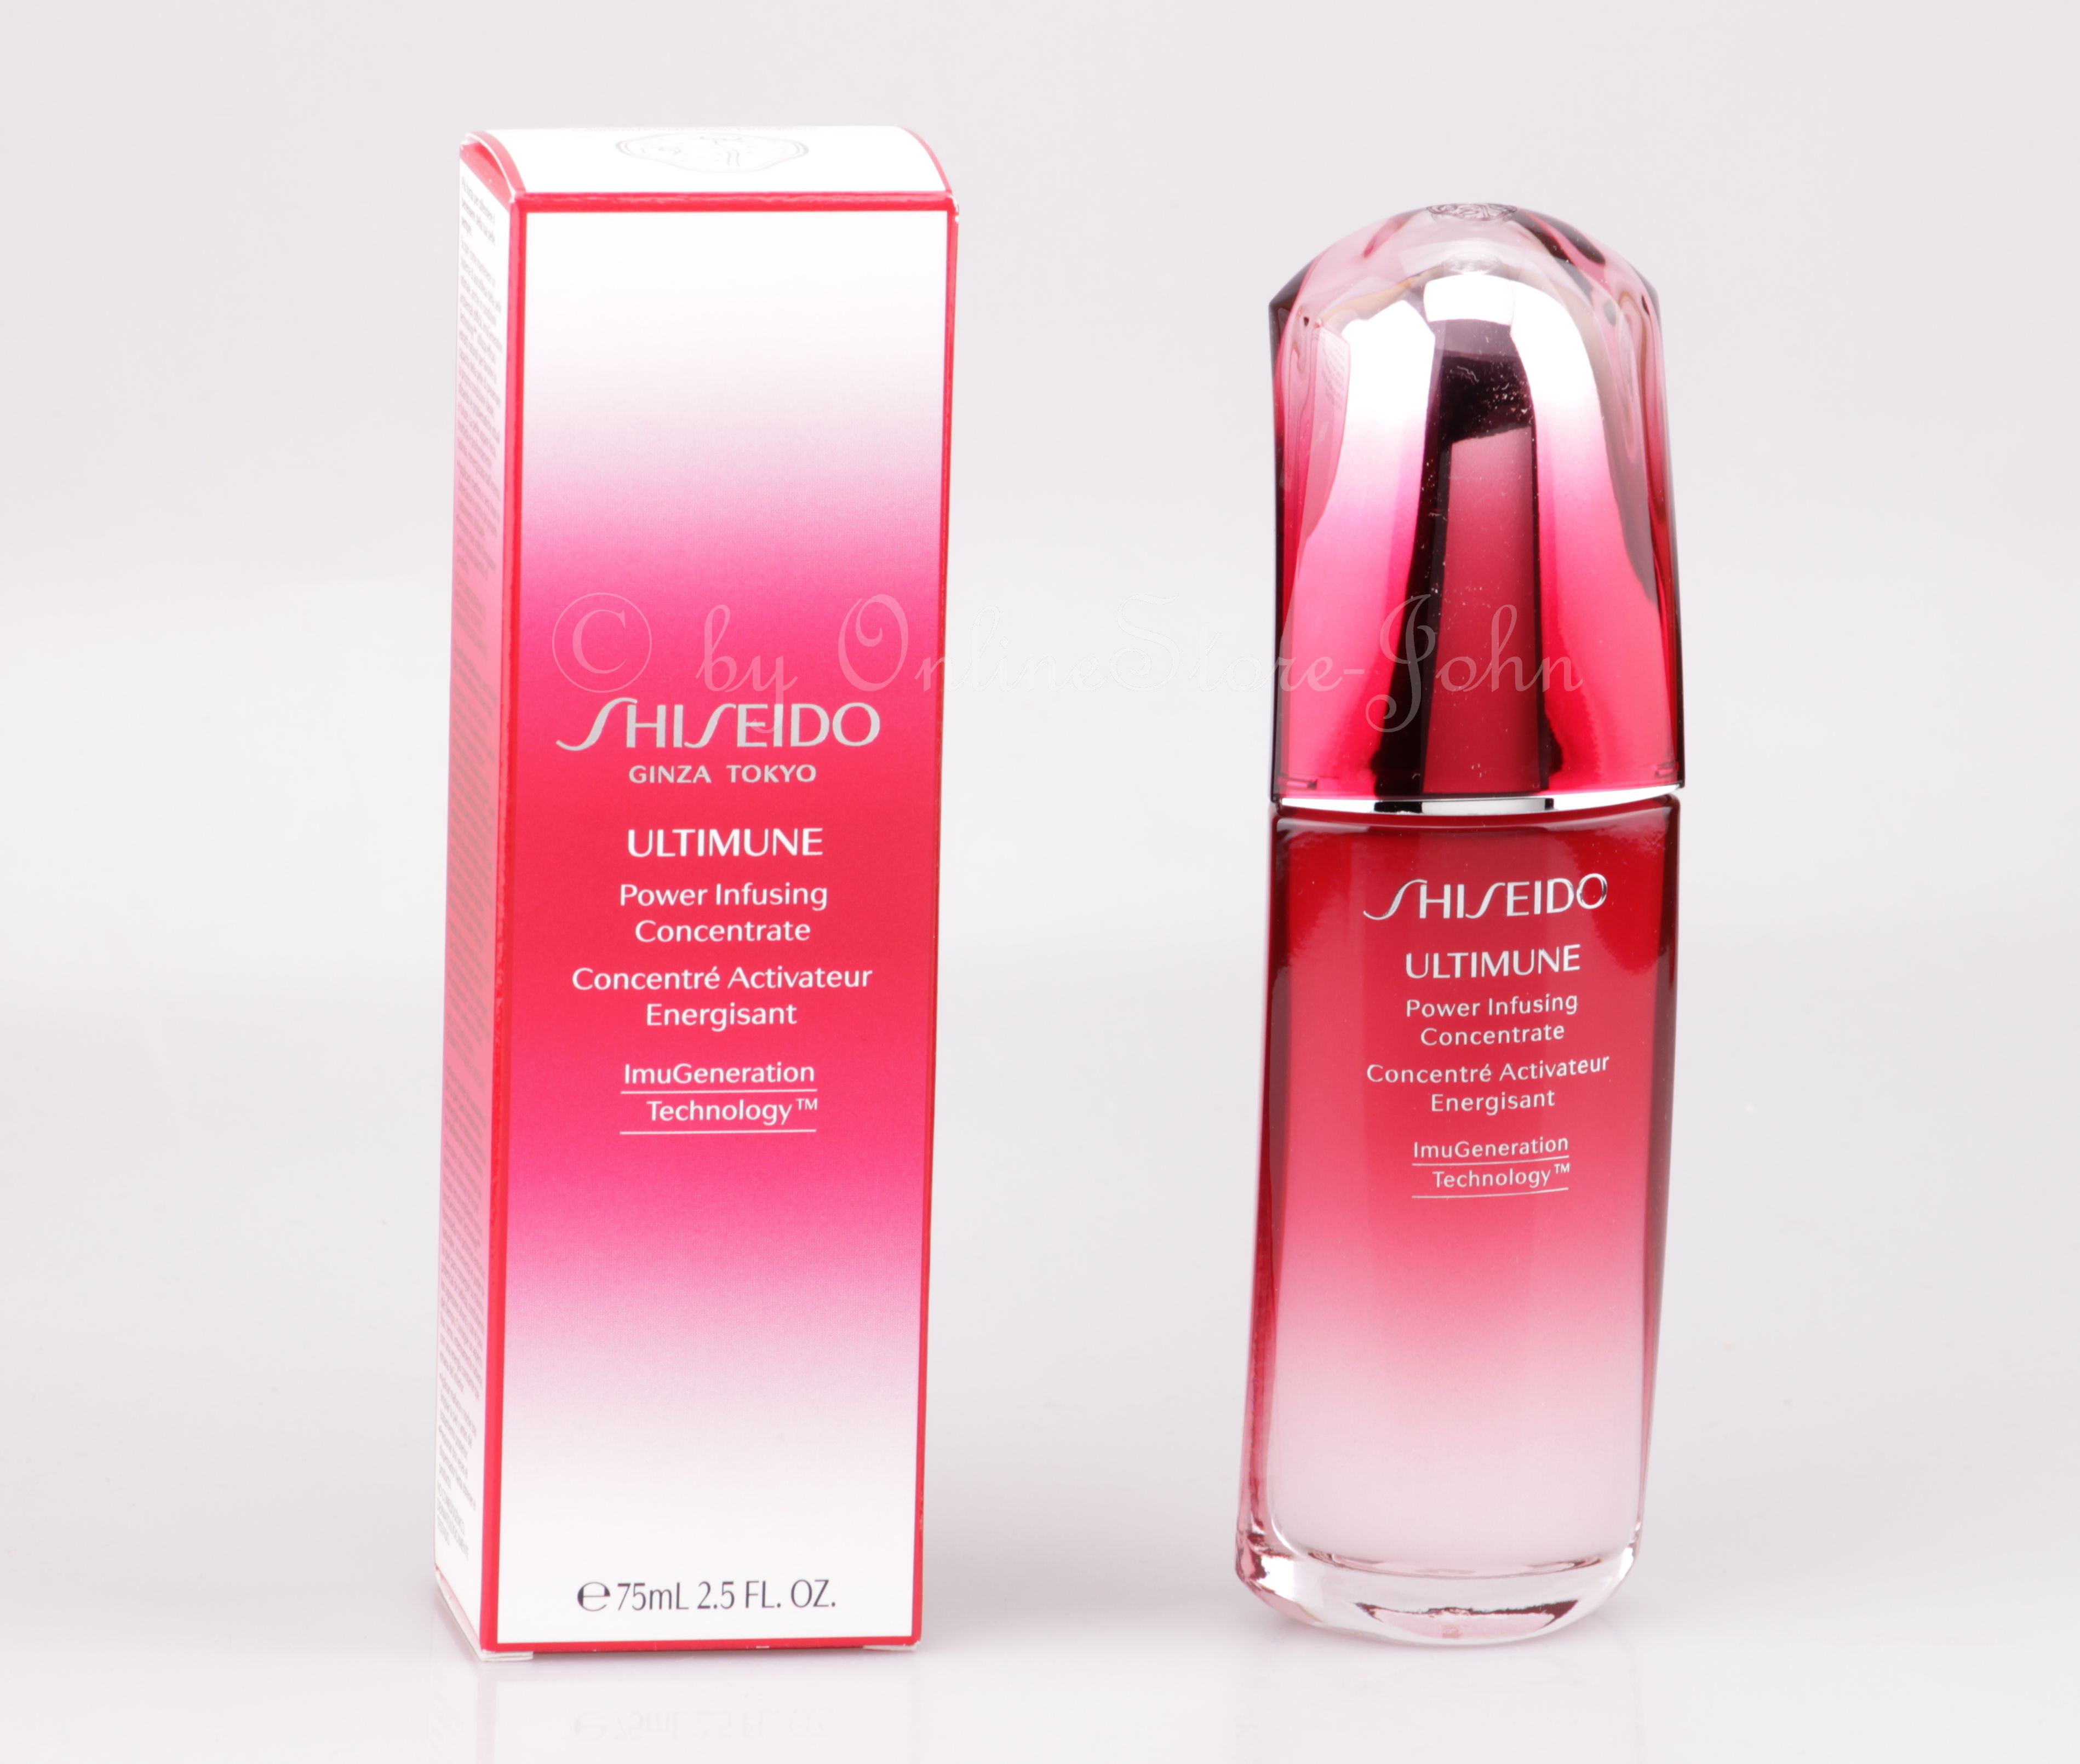 Shiseido ultimune power infusing concentrate. Ultimune концентрат шисейдо. Ultimune концентрат шисейдо Power infusing. Shiseido Ultimate Power infusing. Ultimune Ginza шисейдо 30 мл.